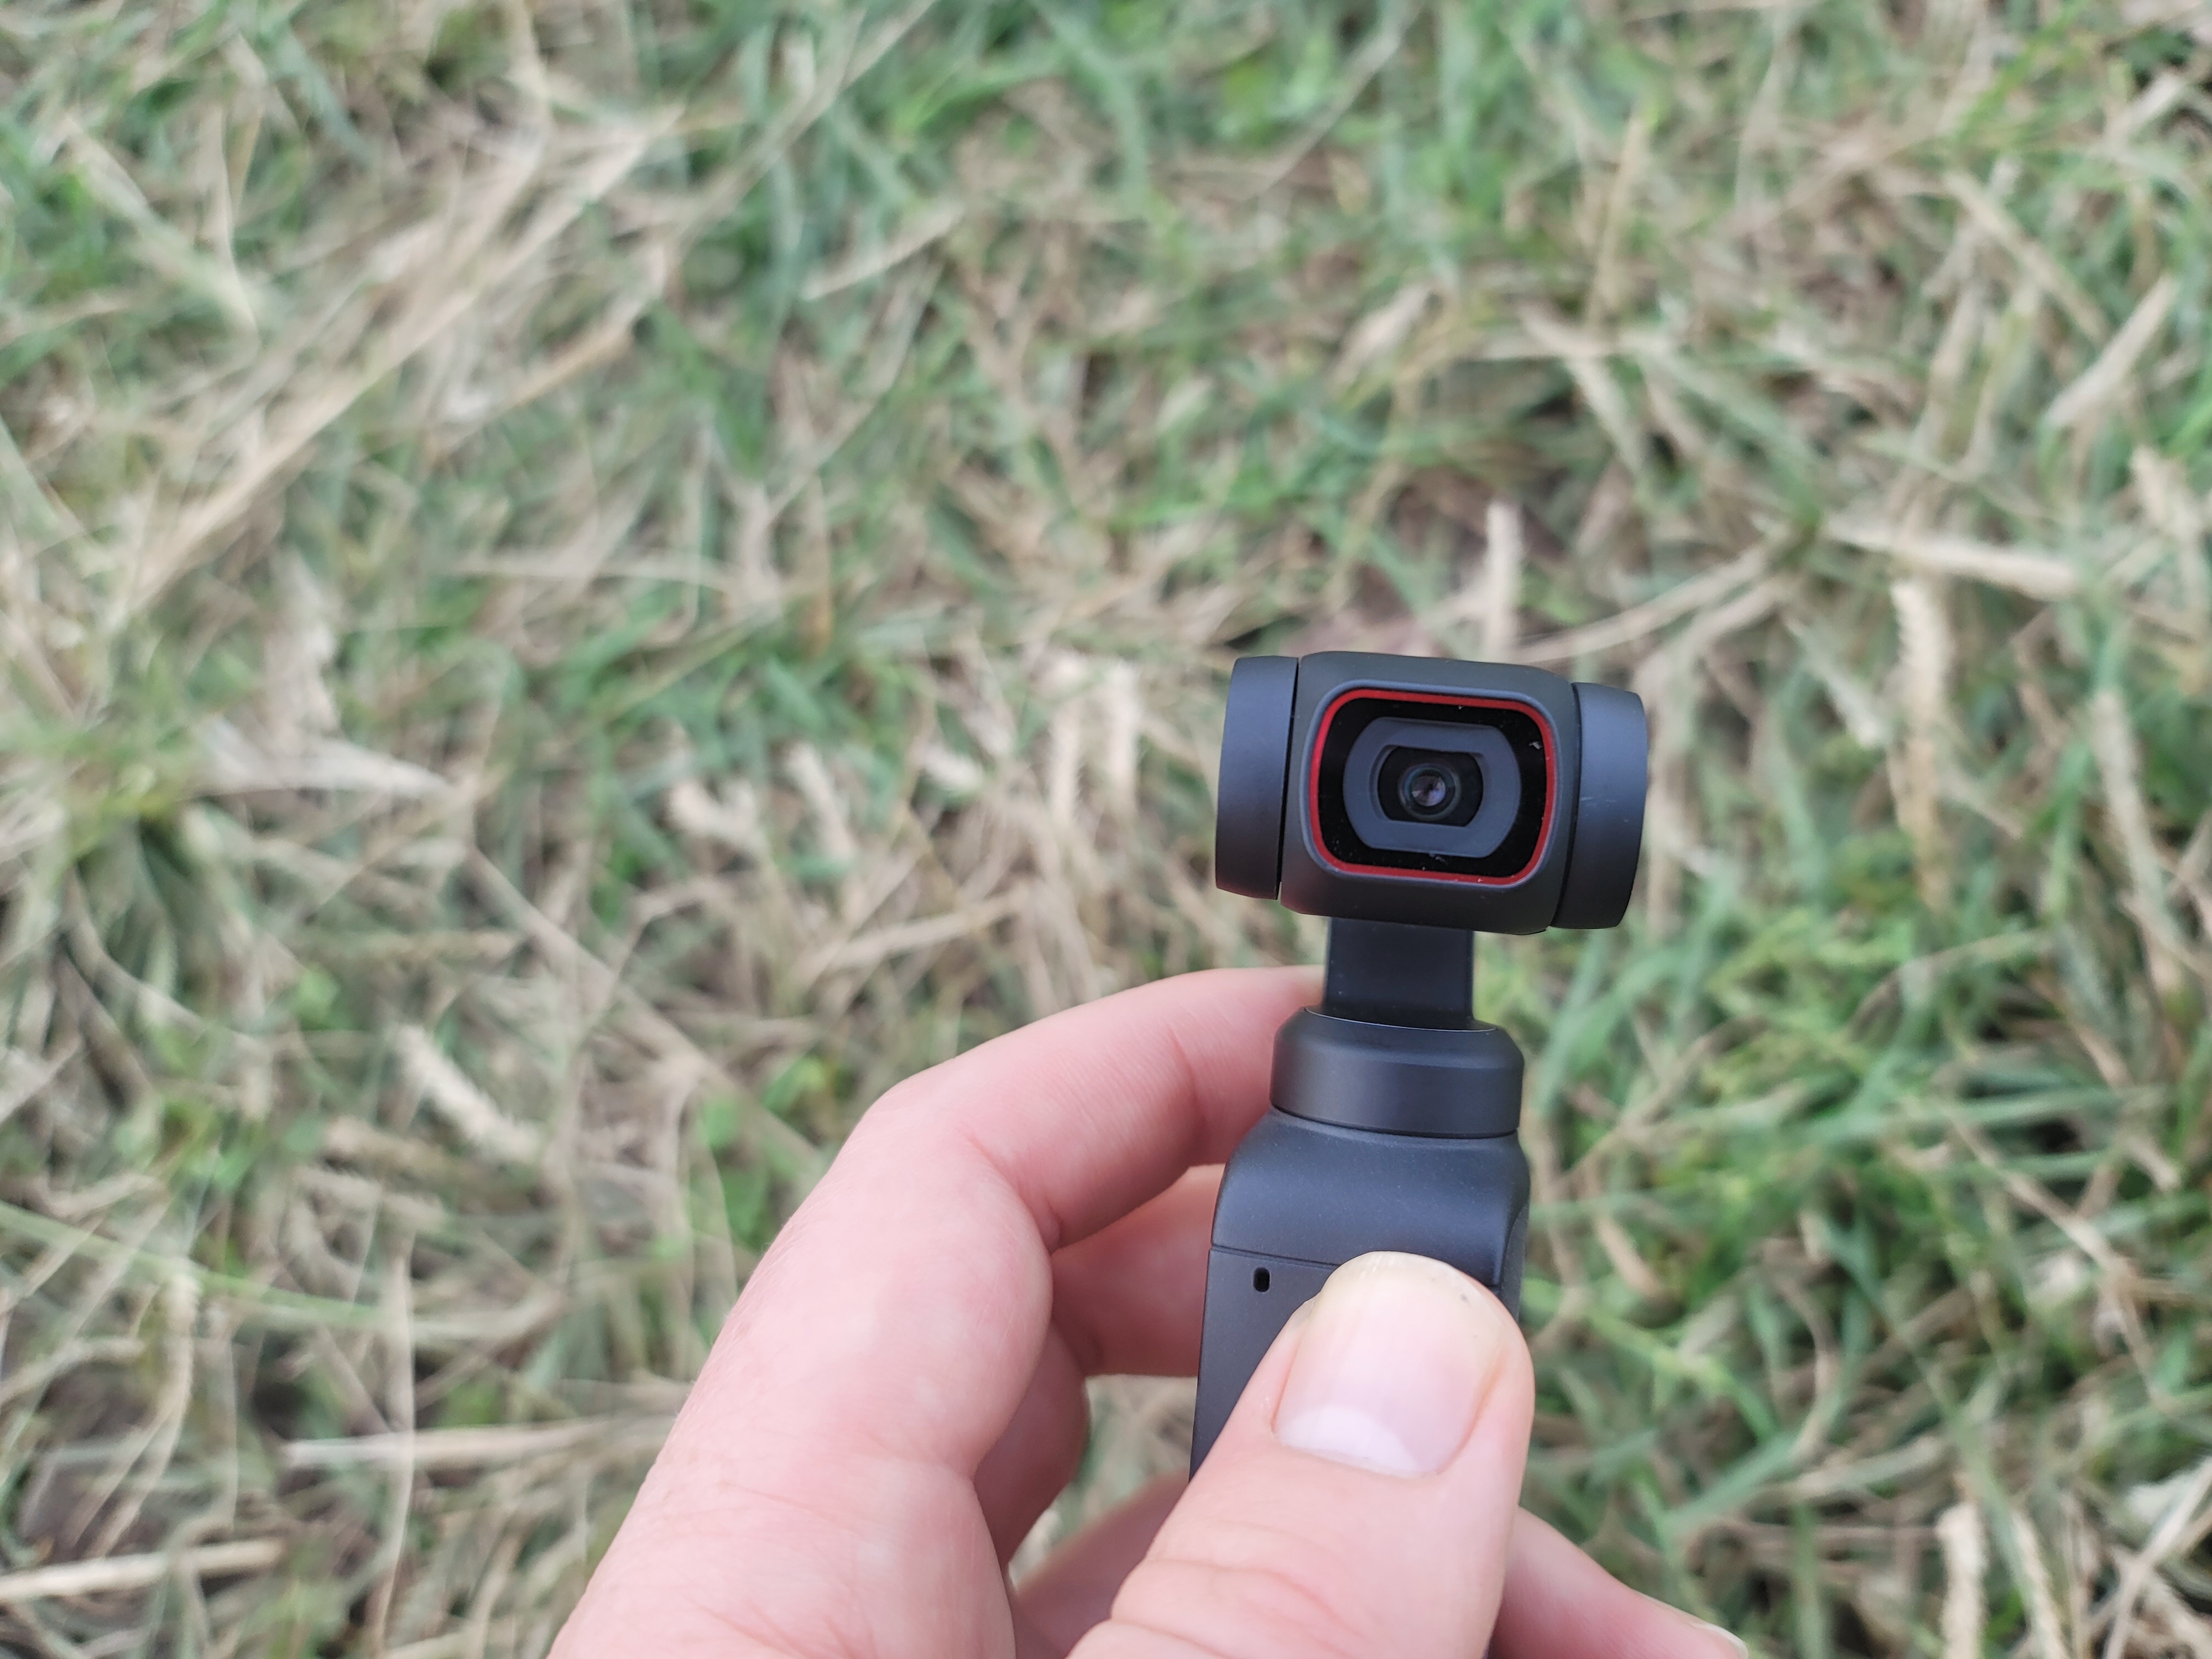 DJI's Pocket gimbal is an extremely fun way to grab impressive smartphone  shots TechCrunch